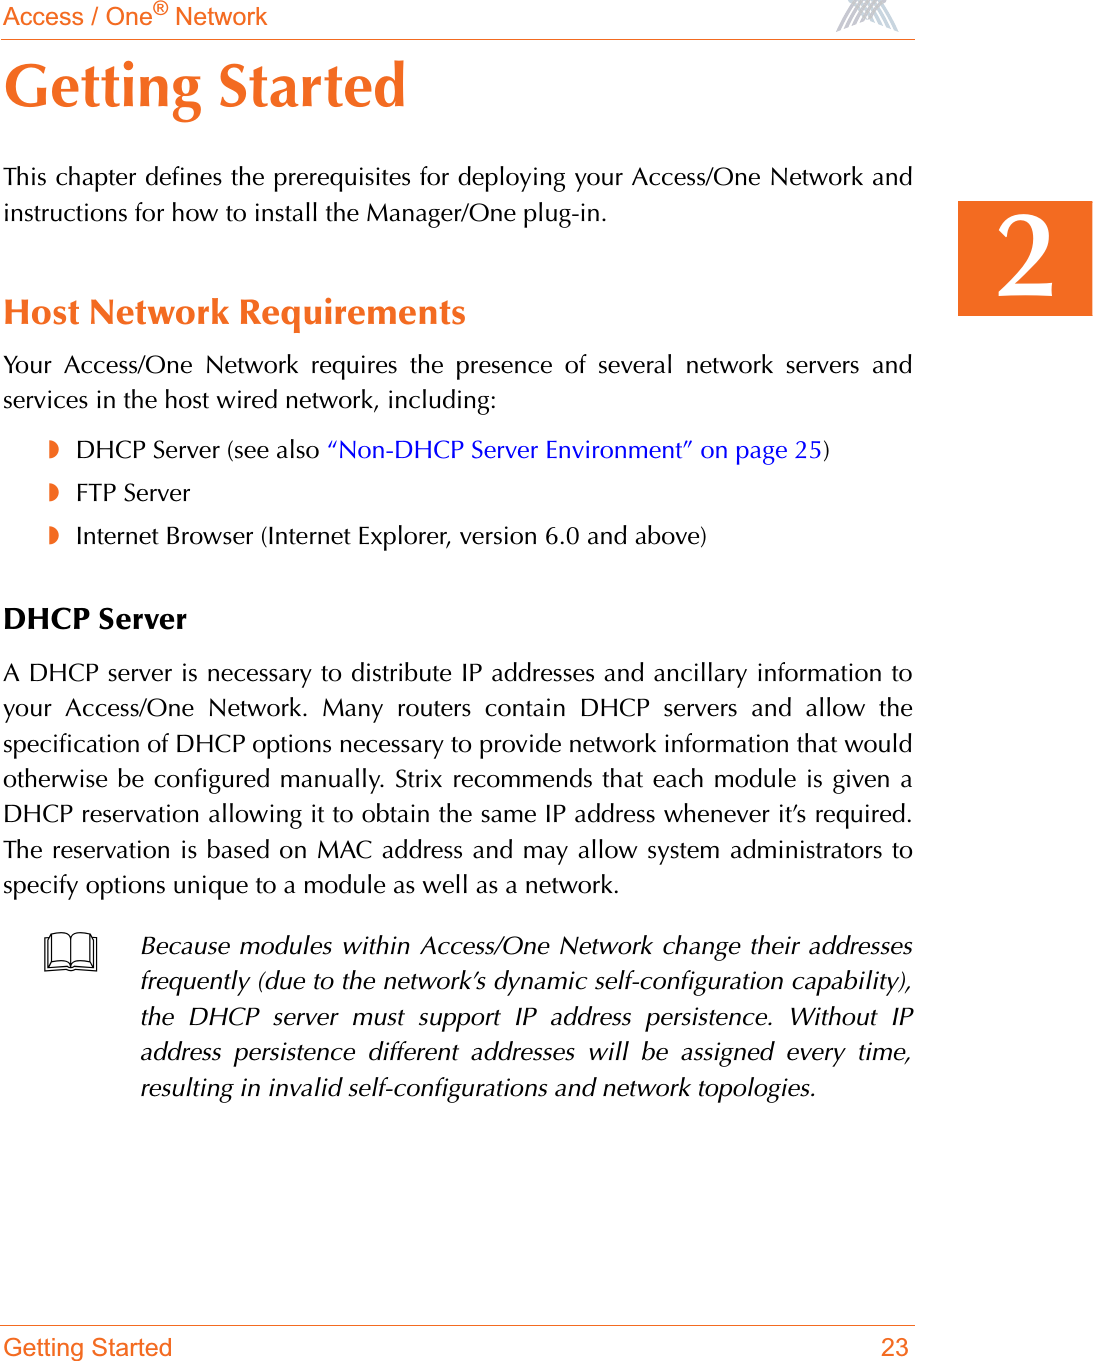 Access / One® NetworkGetting Started 232Getting StartedThis chapter defines the prerequisites for deploying your Access/One Network andinstructions for how to install the Manager/One plug-in.Host Network RequirementsYour Access/One Network requires the presence of several network servers andservices in the host wired network, including:◗DHCP Server (see also “Non-DHCP Server Environment” on page 25)◗FTP Server◗Internet Browser (Internet Explorer, version 6.0 and above)DHCP ServerA DHCP server is necessary to distribute IP addresses and ancillary information toyour Access/One Network. Many routers contain DHCP servers and allow thespecification of DHCP options necessary to provide network information that wouldotherwise be configured manually. Strix recommends that each module is given aDHCP reservation allowing it to obtain the same IP address whenever it’s required.The reservation is based on MAC address and may allow system administrators tospecify options unique to a module as well as a network.Because modules within Access/One Network change their addressesfrequently (due to the network’s dynamic self-configuration capability),the DHCP server must support IP address persistence. Without IPaddress persistence different addresses will be assigned every time,resulting in invalid self-configurations and network topologies.